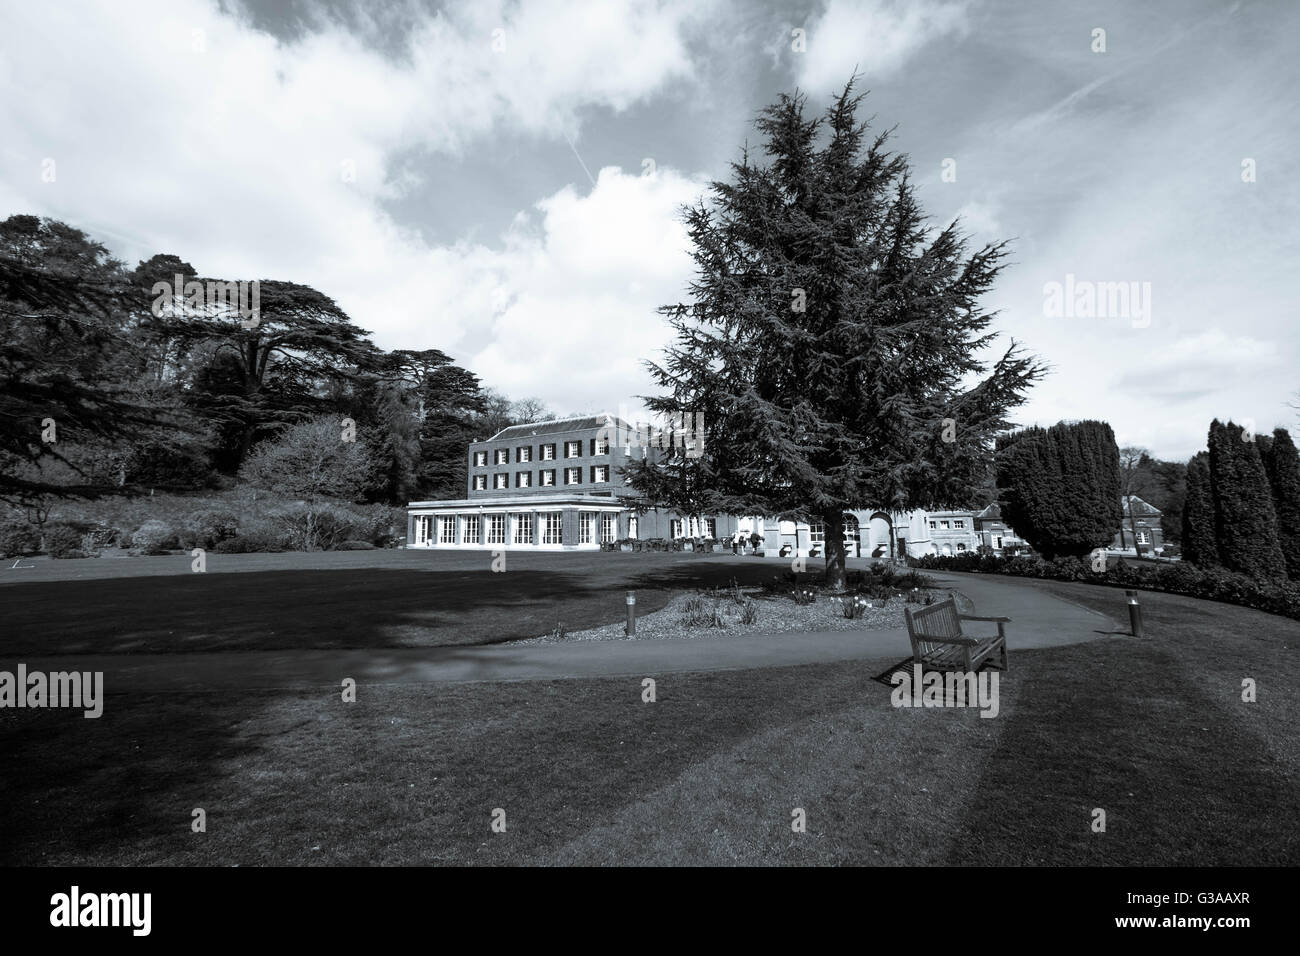 Selenium Toned Image of the Royal Automobile Club Epsom Surrey Overlooking the Croquet Lawn Stock Photo